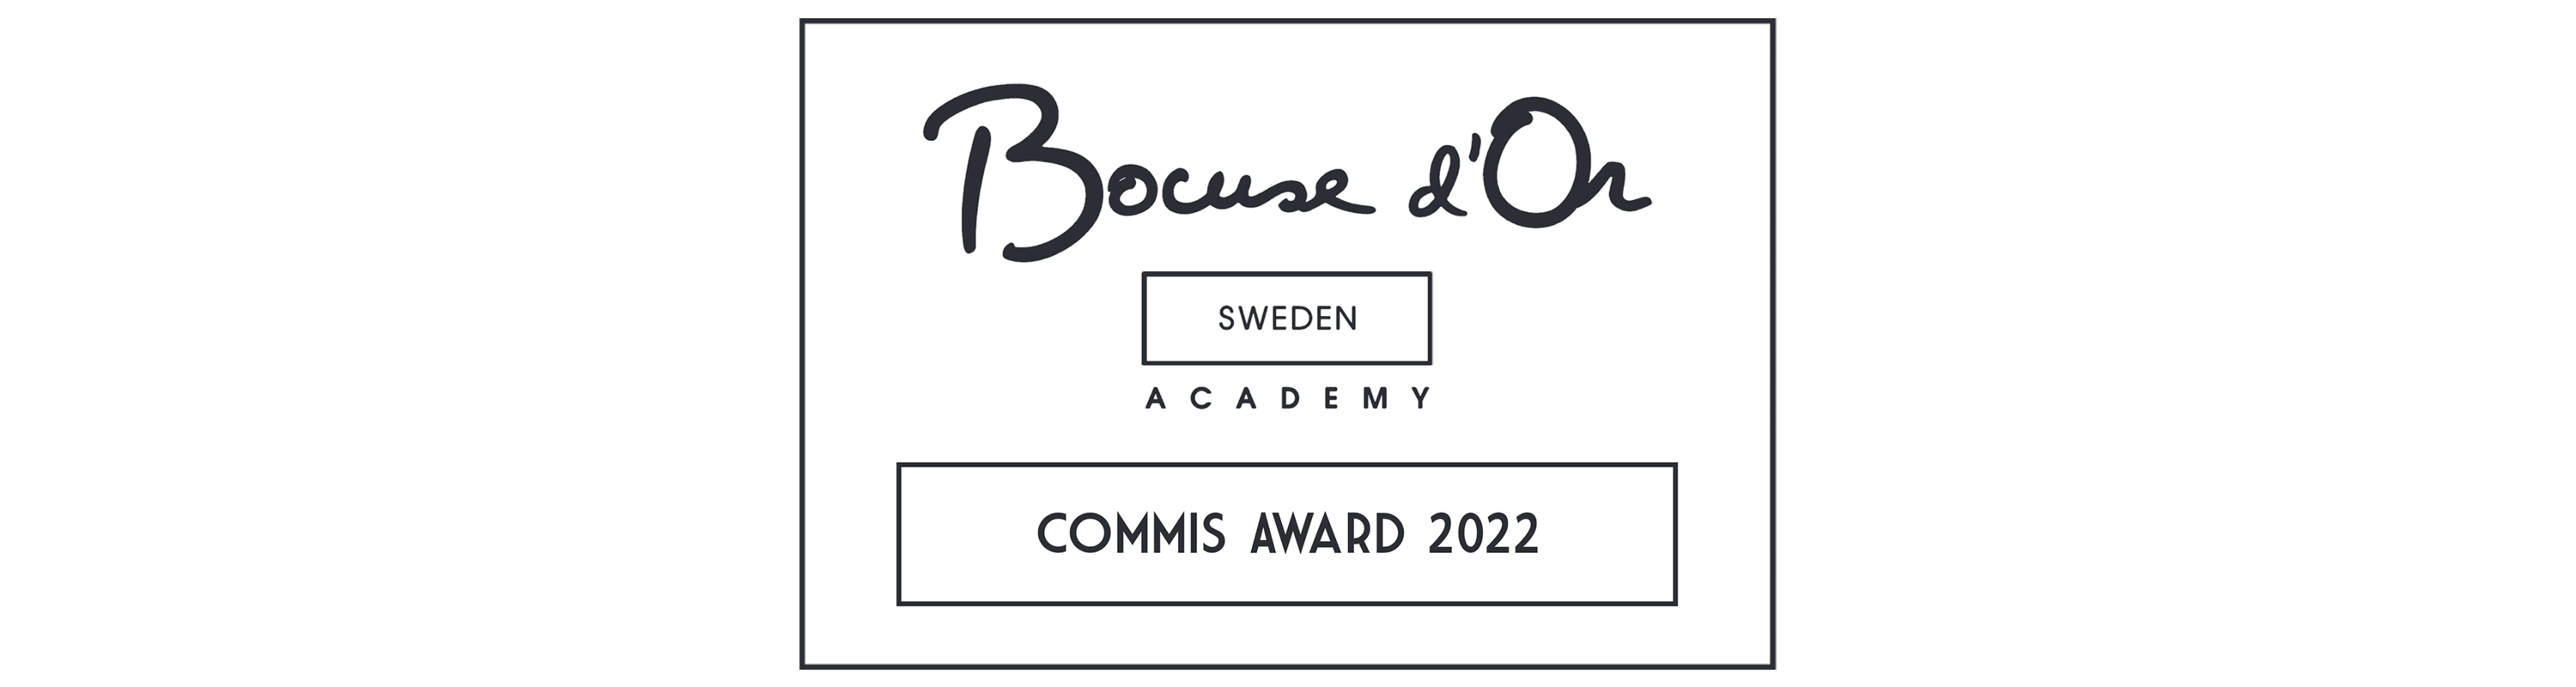 Bocuse d’Or Sweden young Commis Award